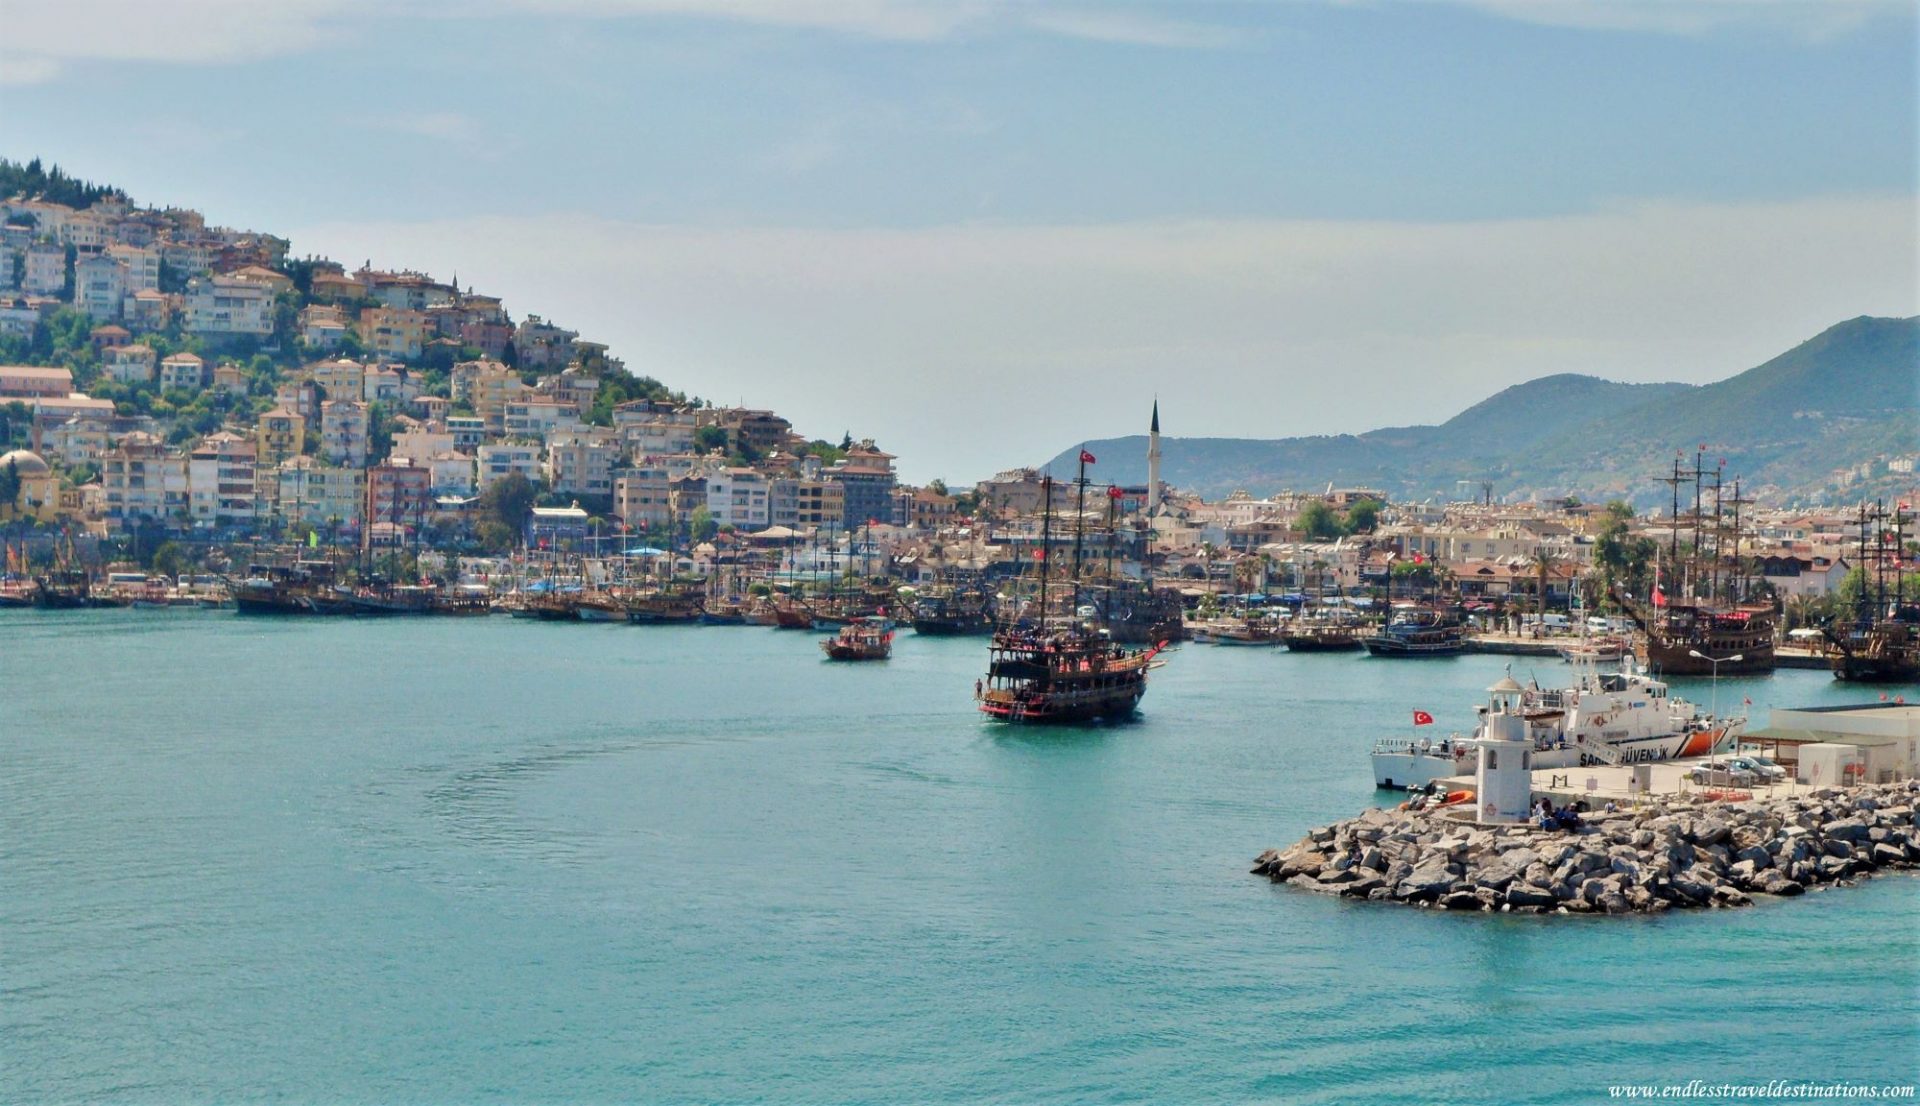 Travel Guide to Alanya - Endless Travel Destinations